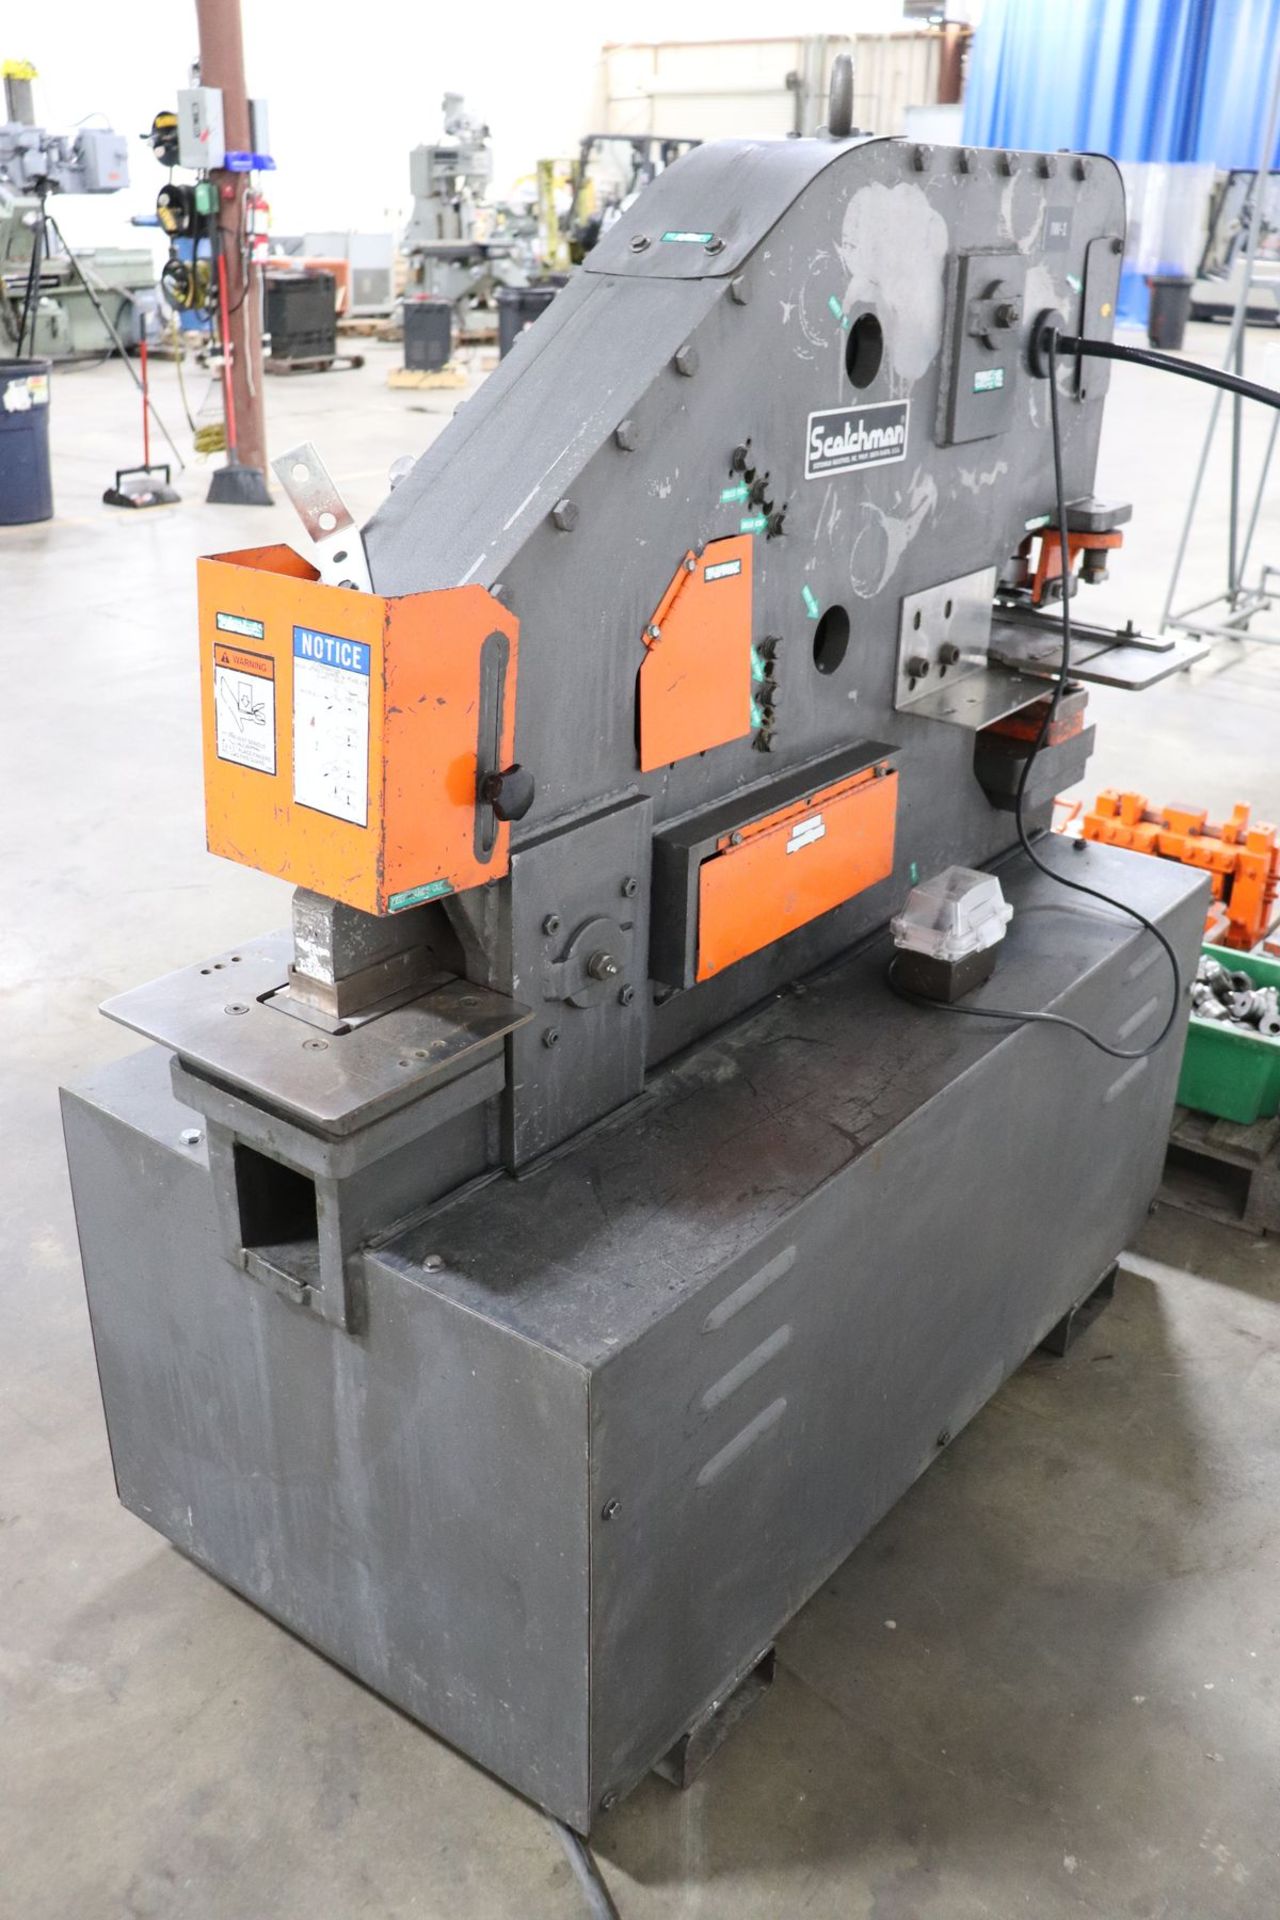 Scotchman FI-51 F1-5109-14M 51 Ton Hydraulic Ironworker, Lots of Tooling / Attachments - Image 11 of 13